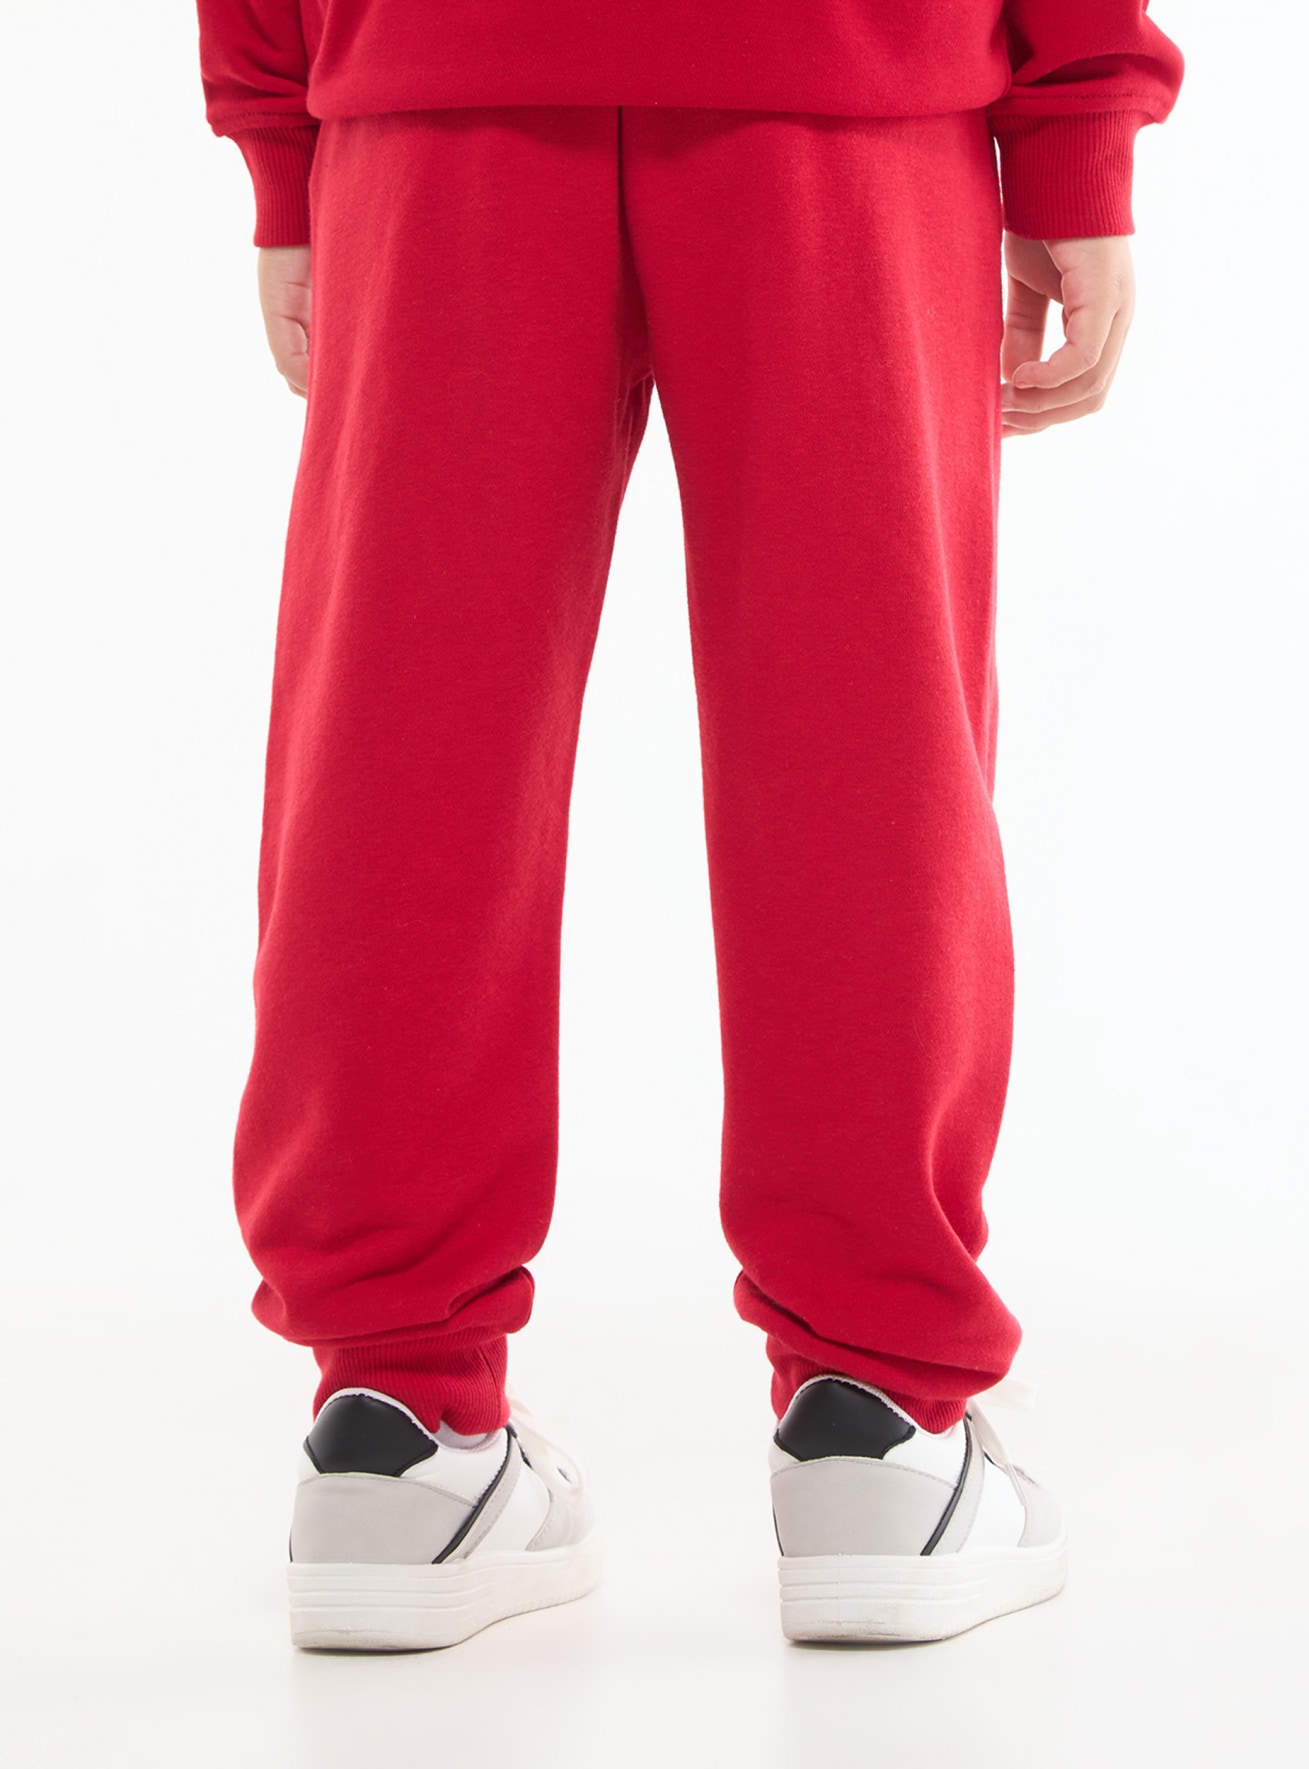 Red bright Tracksuit bottoms with sporty print - Buy Online